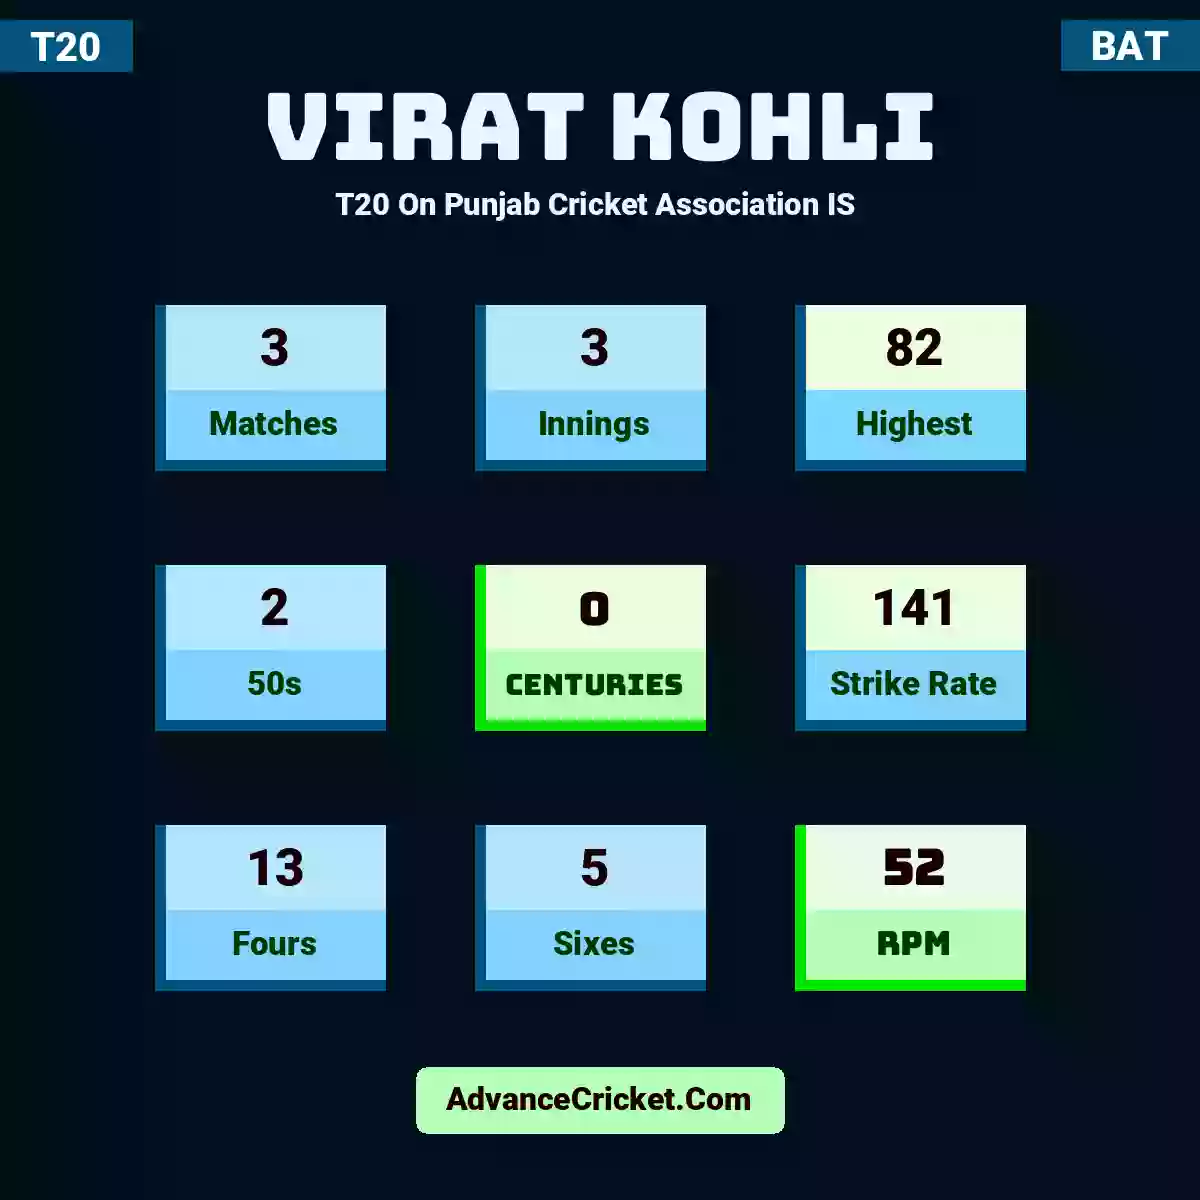 Virat Kohli T20  On Punjab Cricket Association IS , Virat Kohli played 3 matches, scored 82 runs as highest, 2 half-centuries, and 0 centuries, with a strike rate of 141. V.Kohli hit 13 fours and 5 sixes, with an RPM of 52.